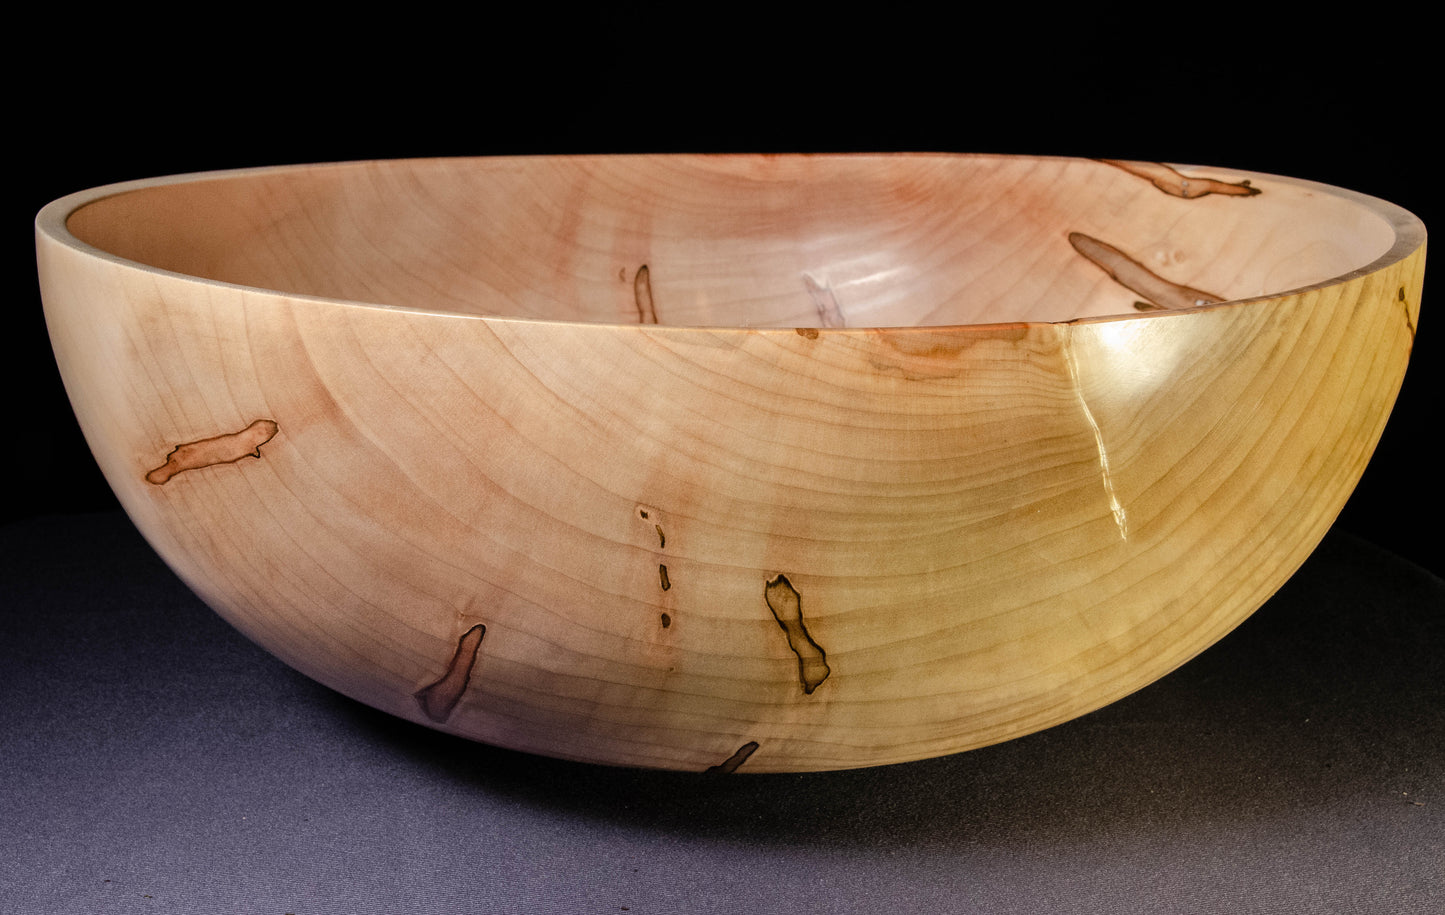 Large ambrosia maple bowl for salad, fruit, popcorn or as a decorative piece, wonderful gift for wedding, home visit